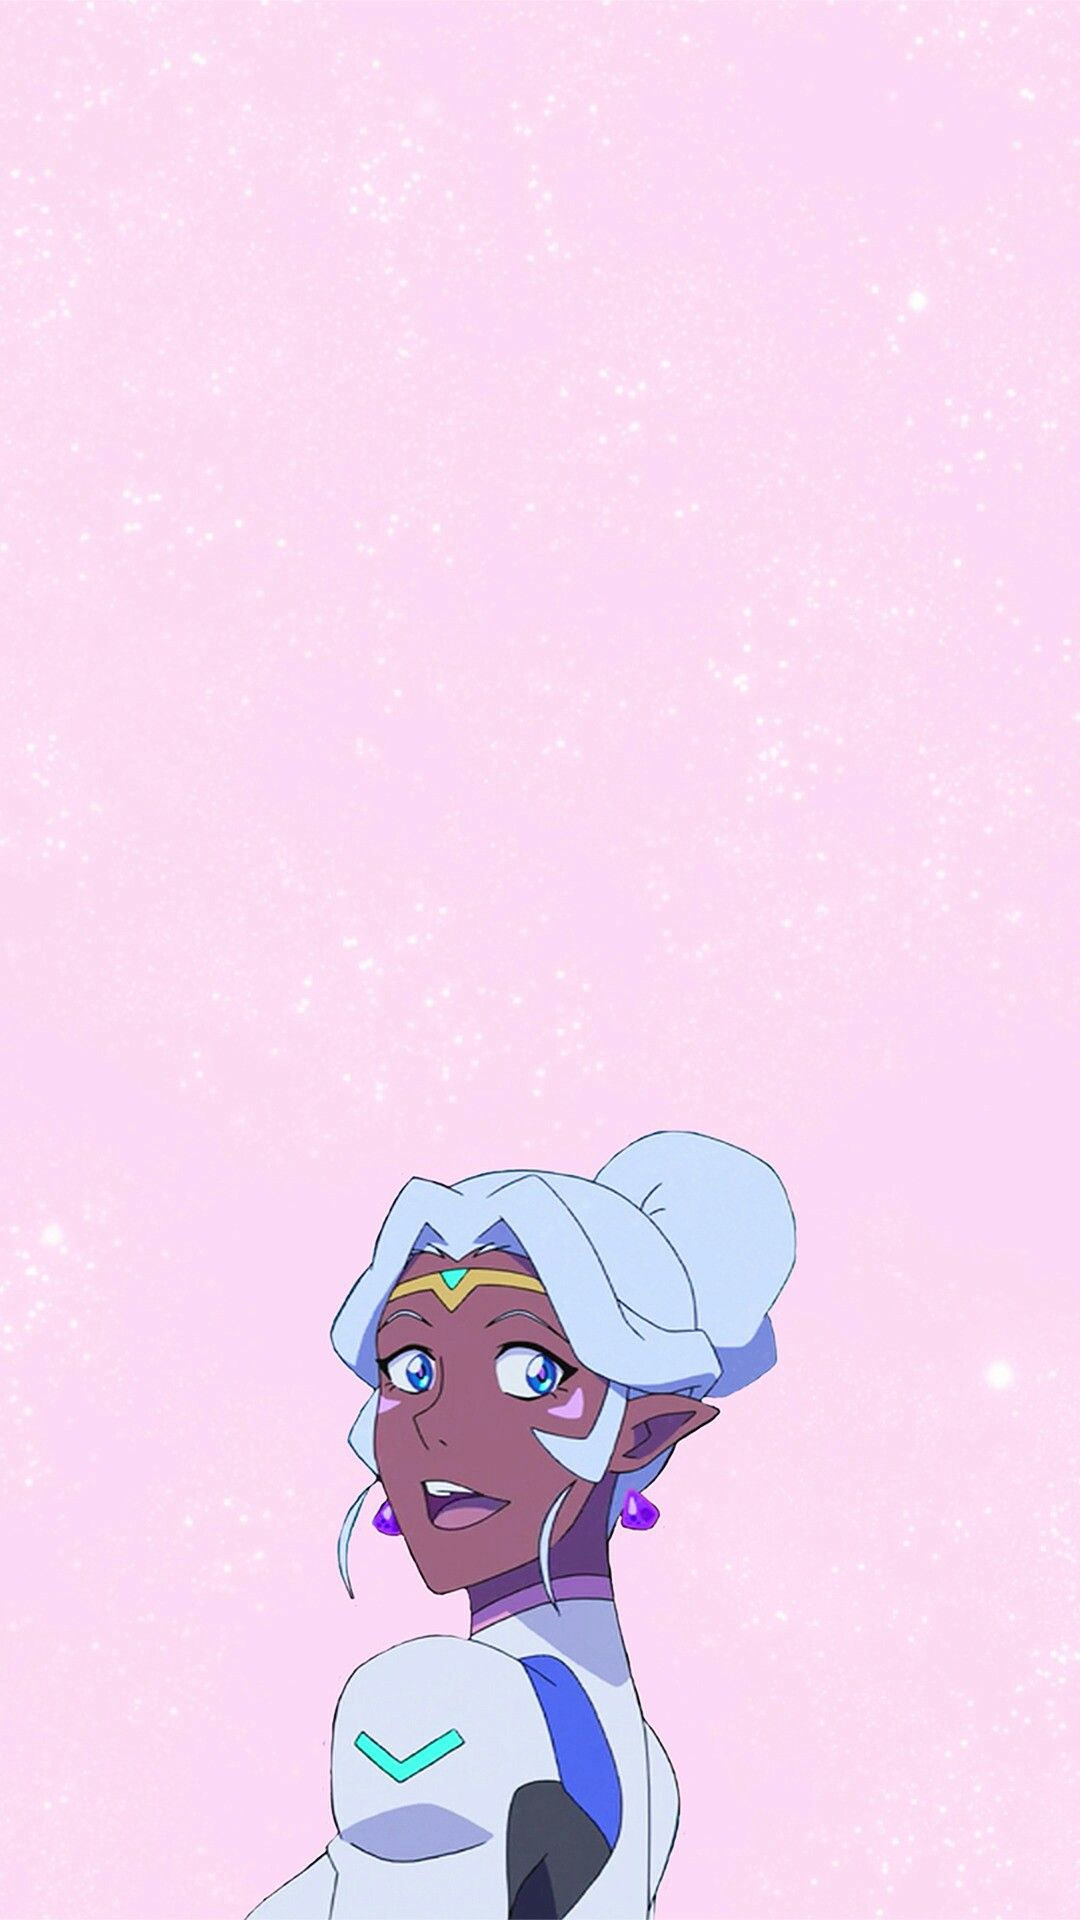 1080x1920 Pin by Blind Child on Wallpapers | Voltron, Black girl art, Wallpaper